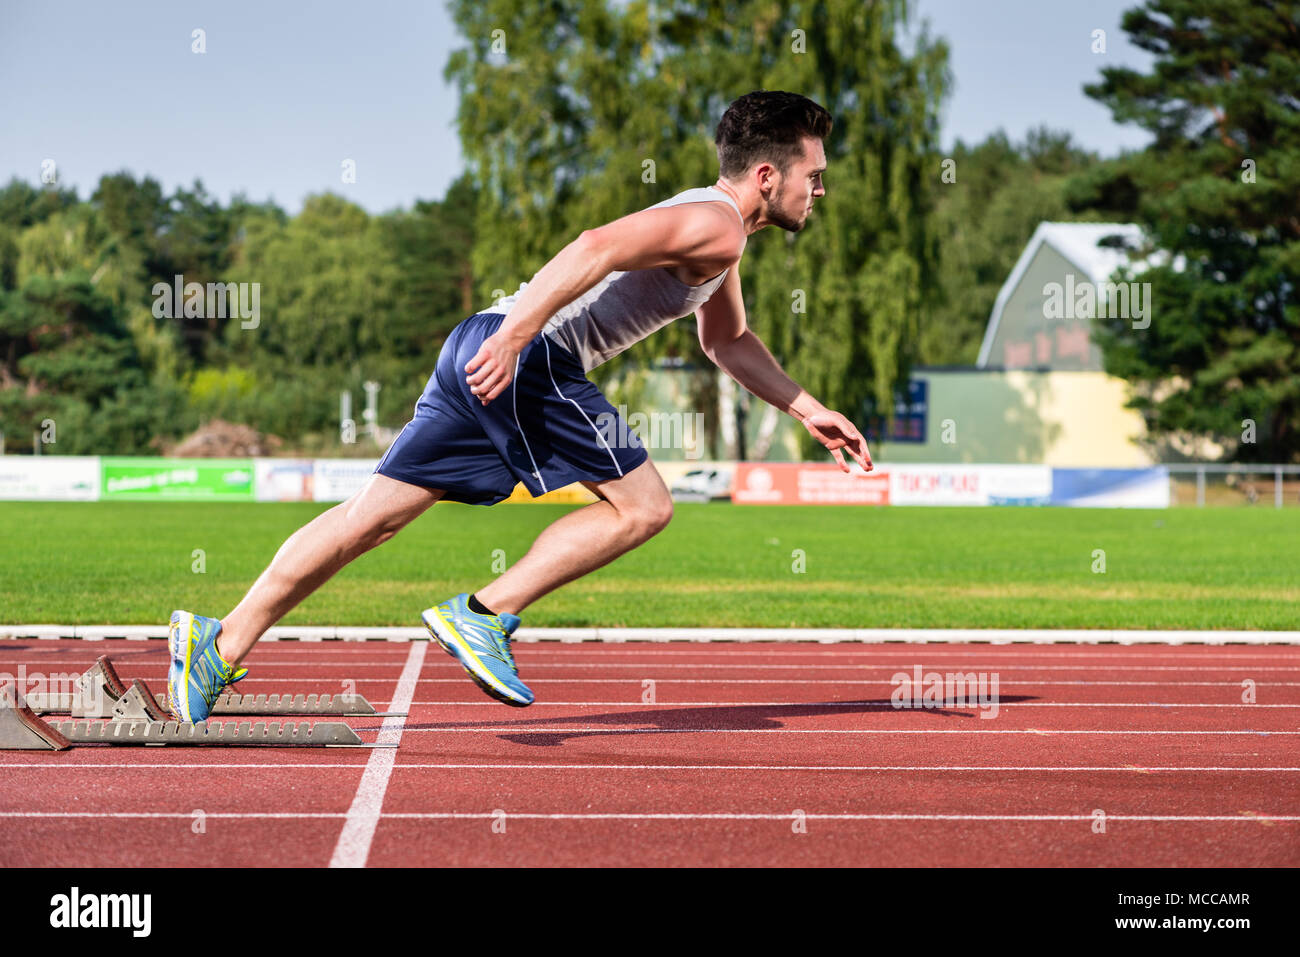 Athlete on cinder track of sports facility starts to sprint Stock Photo